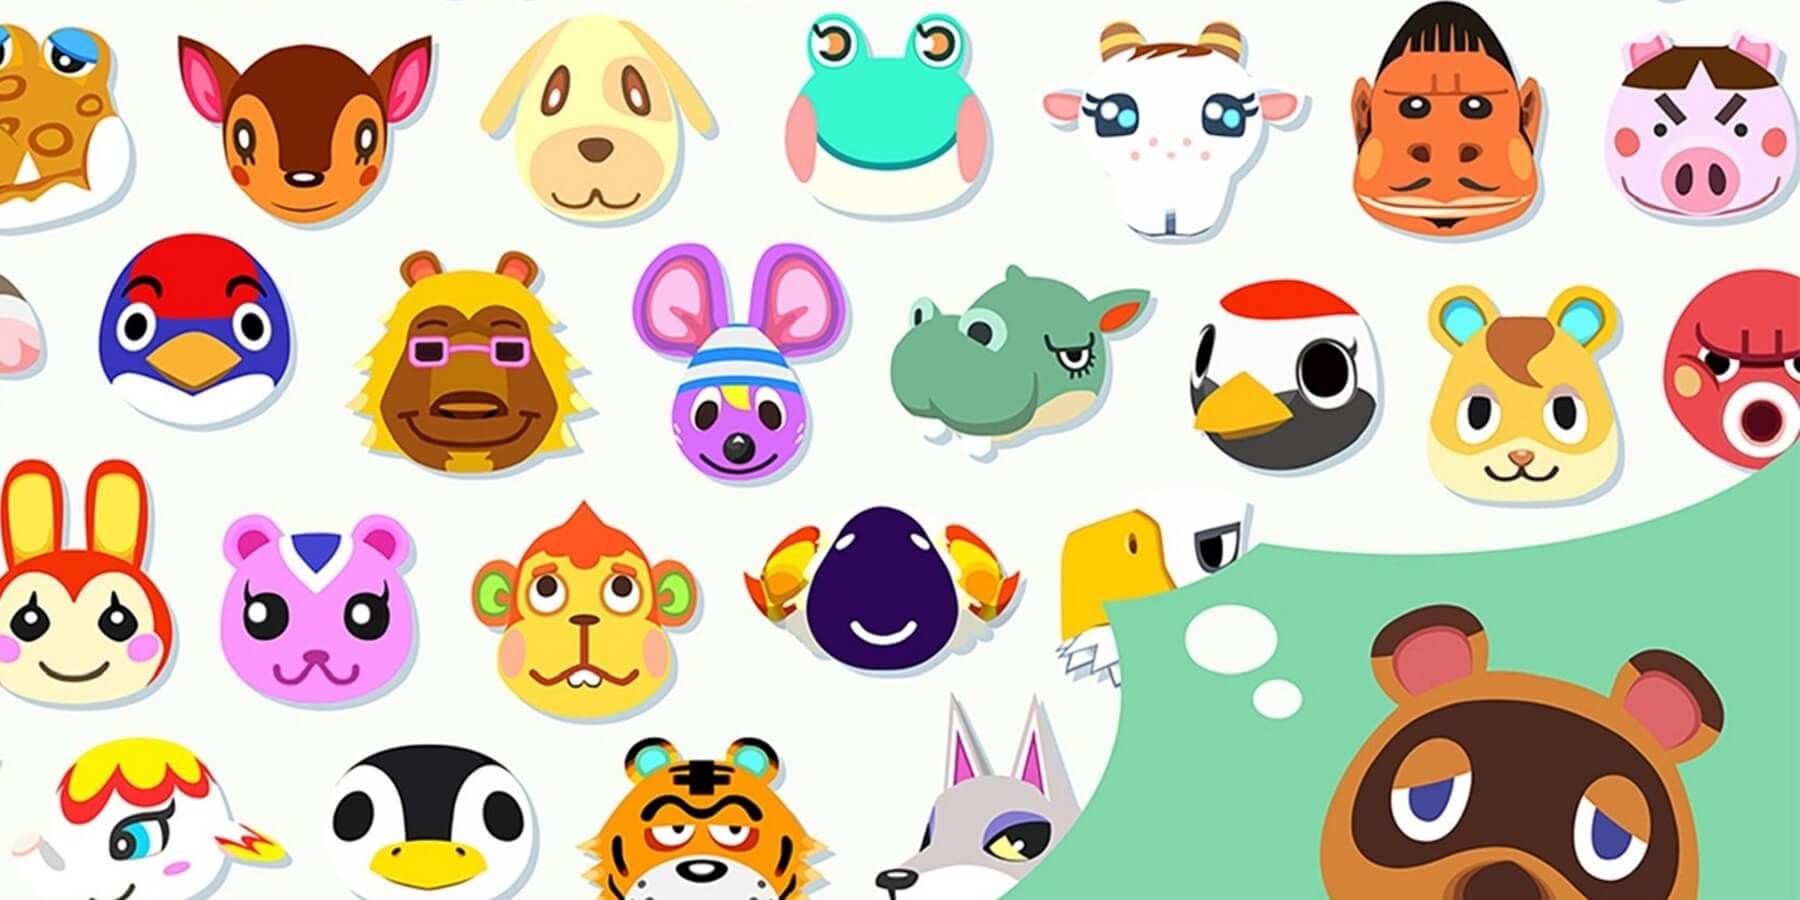 animal crossing new horizons villager icons